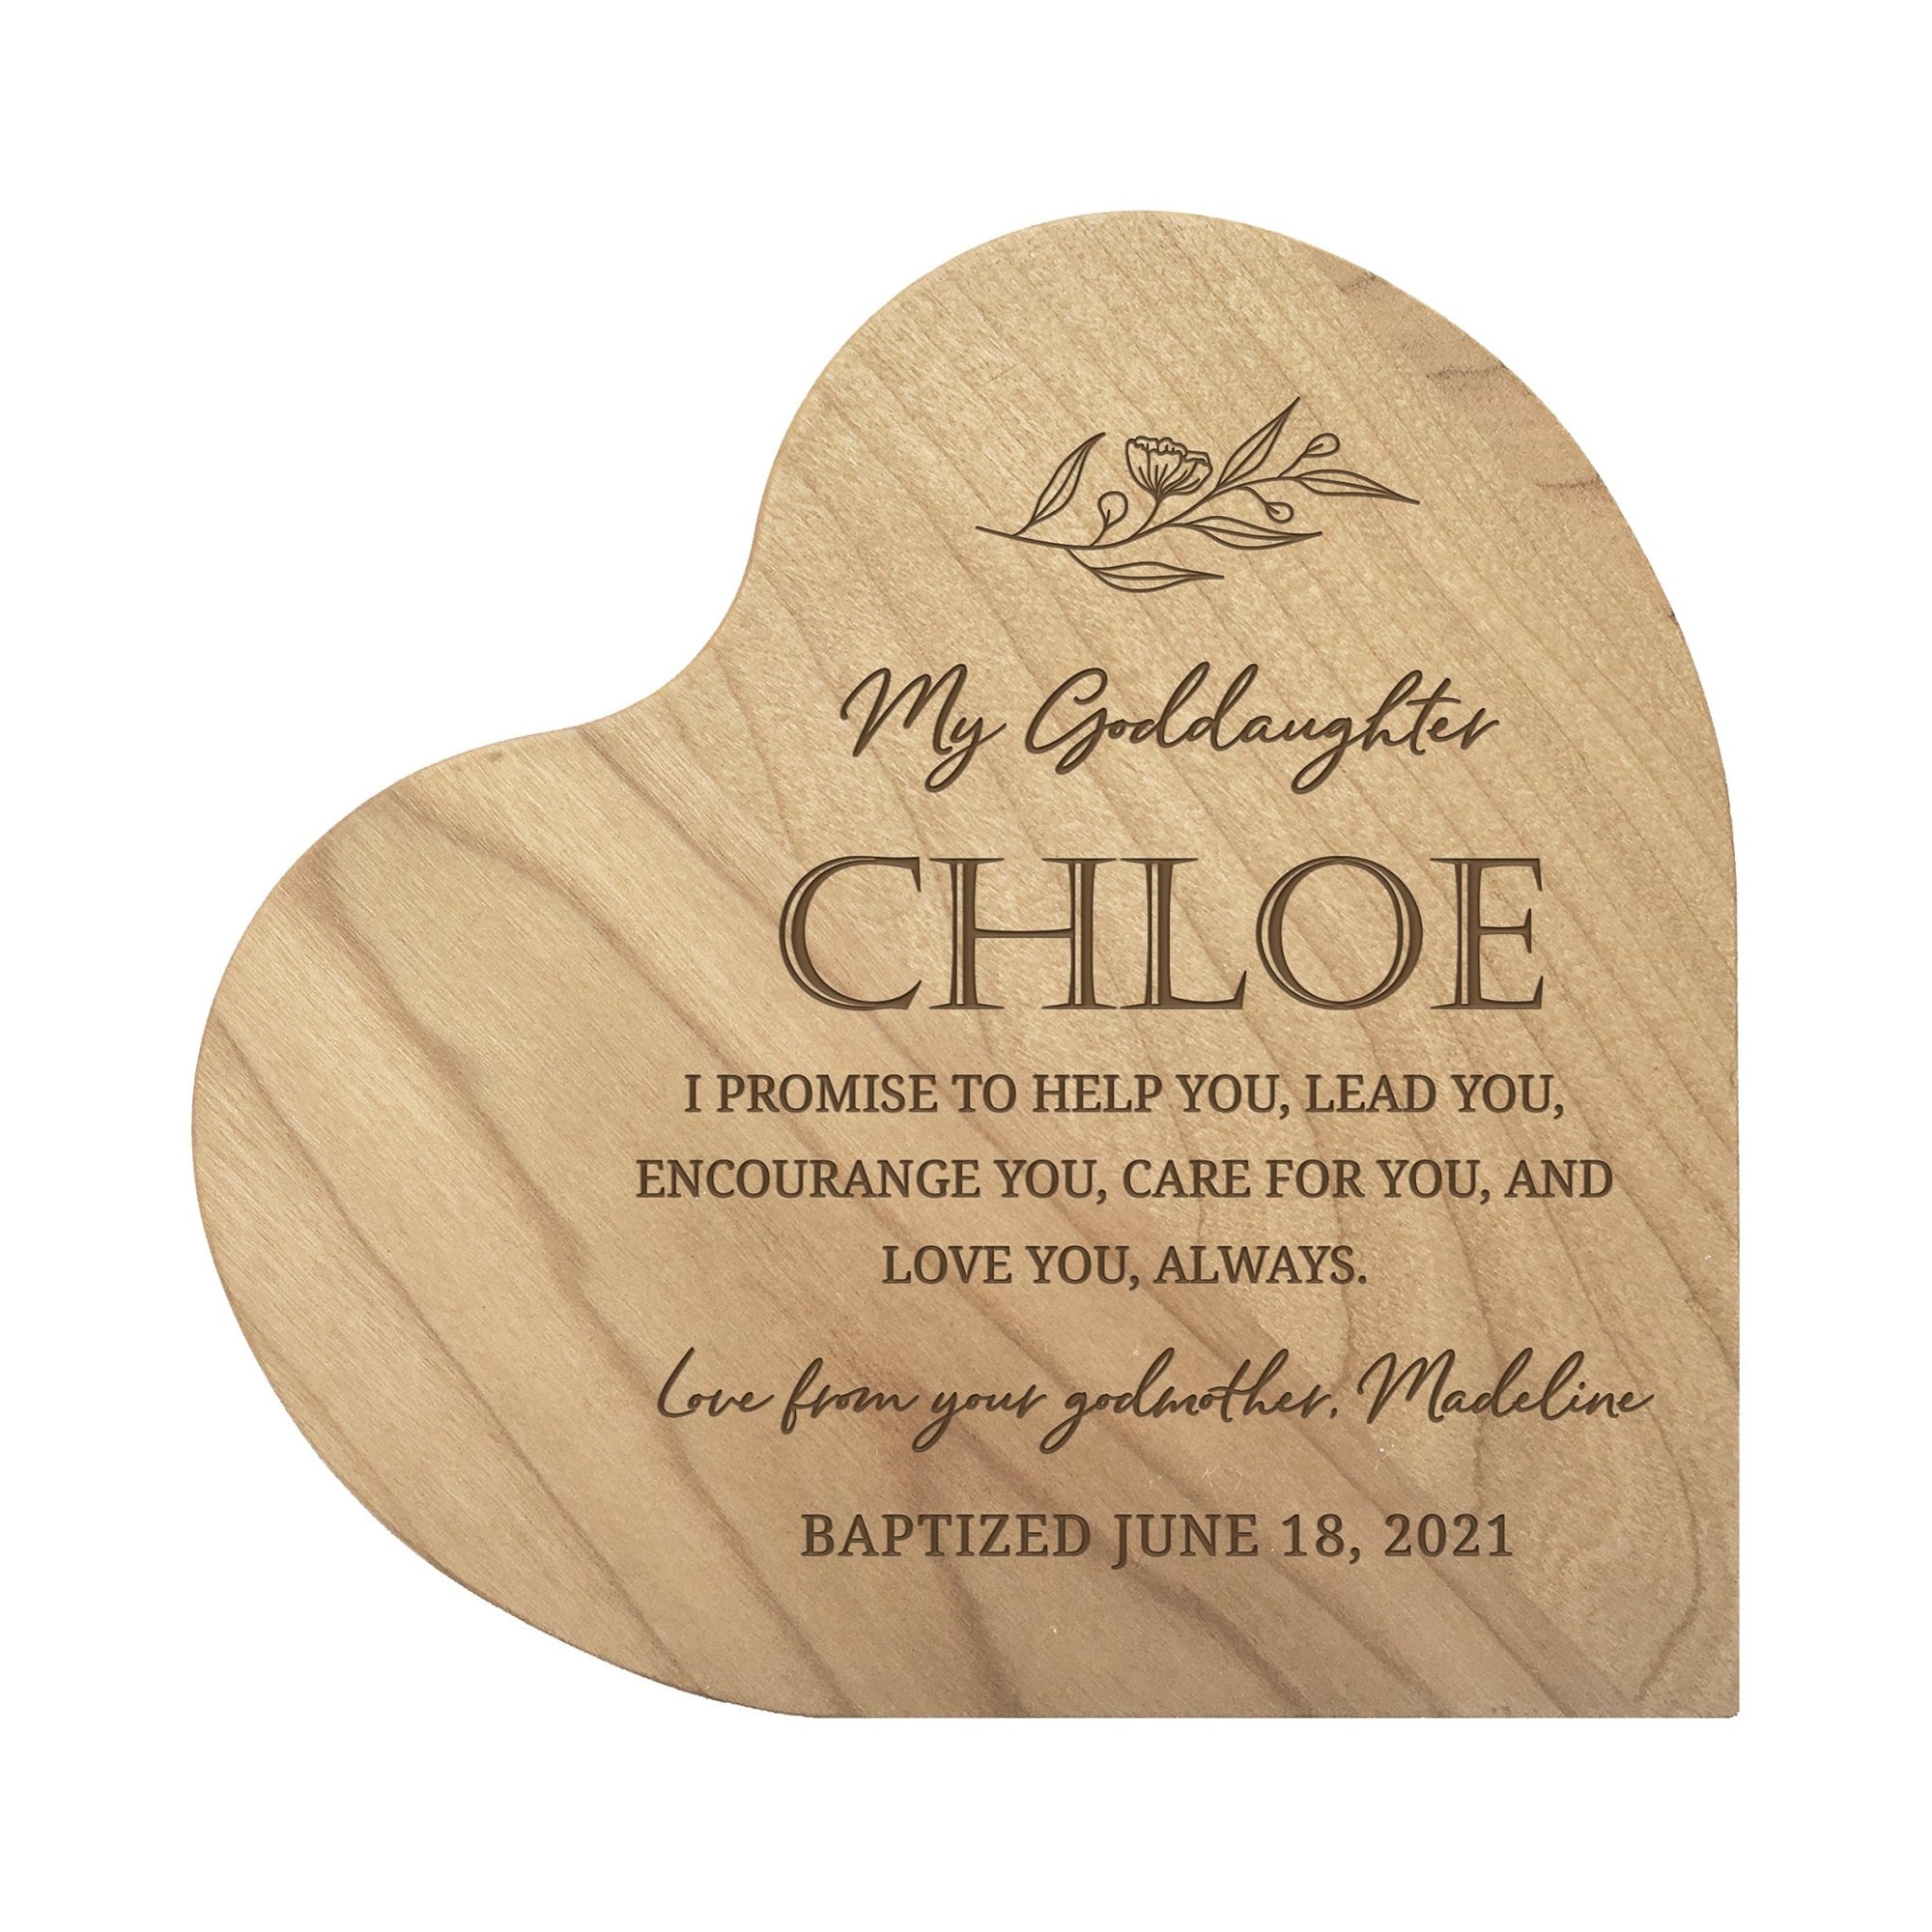 Personalized Baptism Solid Wood Heart Decoration With Inspirational Verse Keepsake Gift 5x5.25 - My Goddaughter, I Promise - LifeSong Milestones